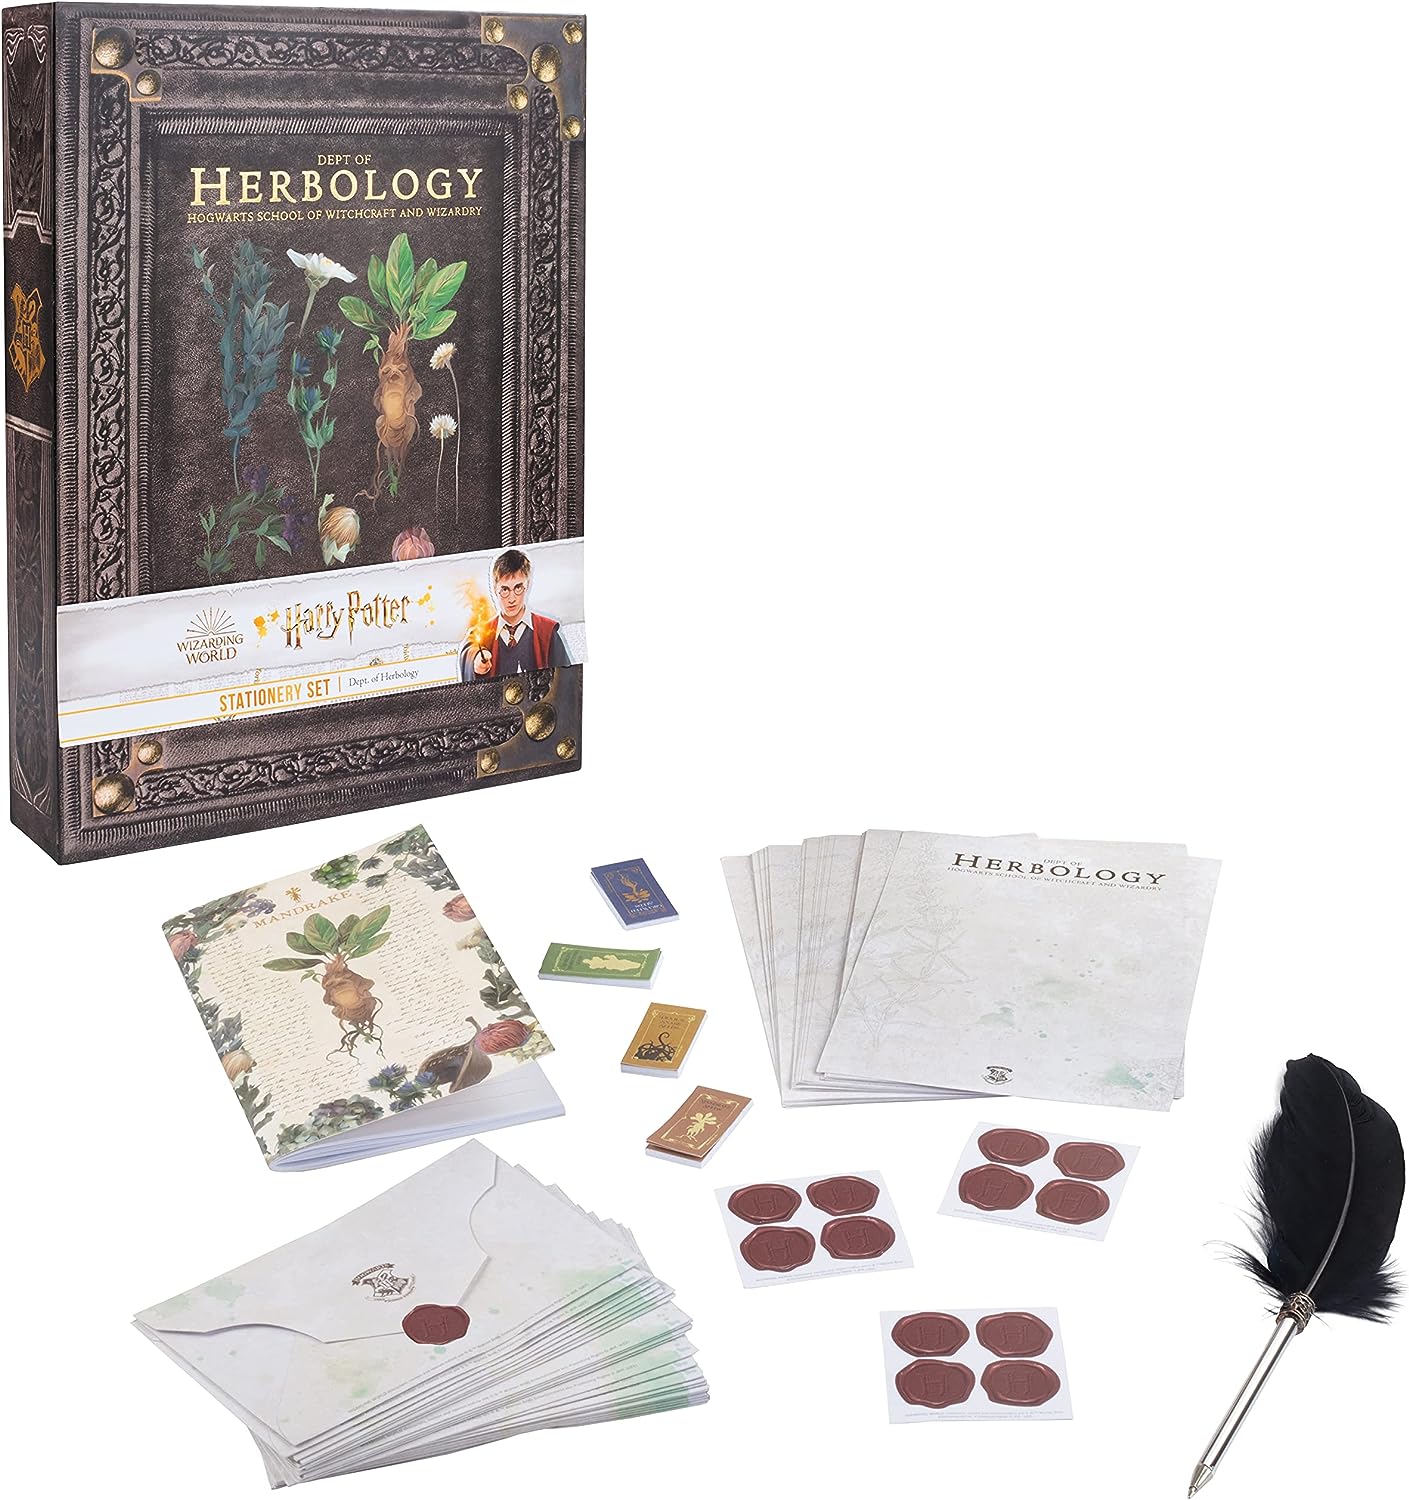 Harry Potter Herbology Stationery Set in Letter Box - Cards, Paper, Envelopes, Stickers & Quill Pen - Vintage Style Illustrations - Officially Licensed - Back to School Gift for Kids, Teens & Adults